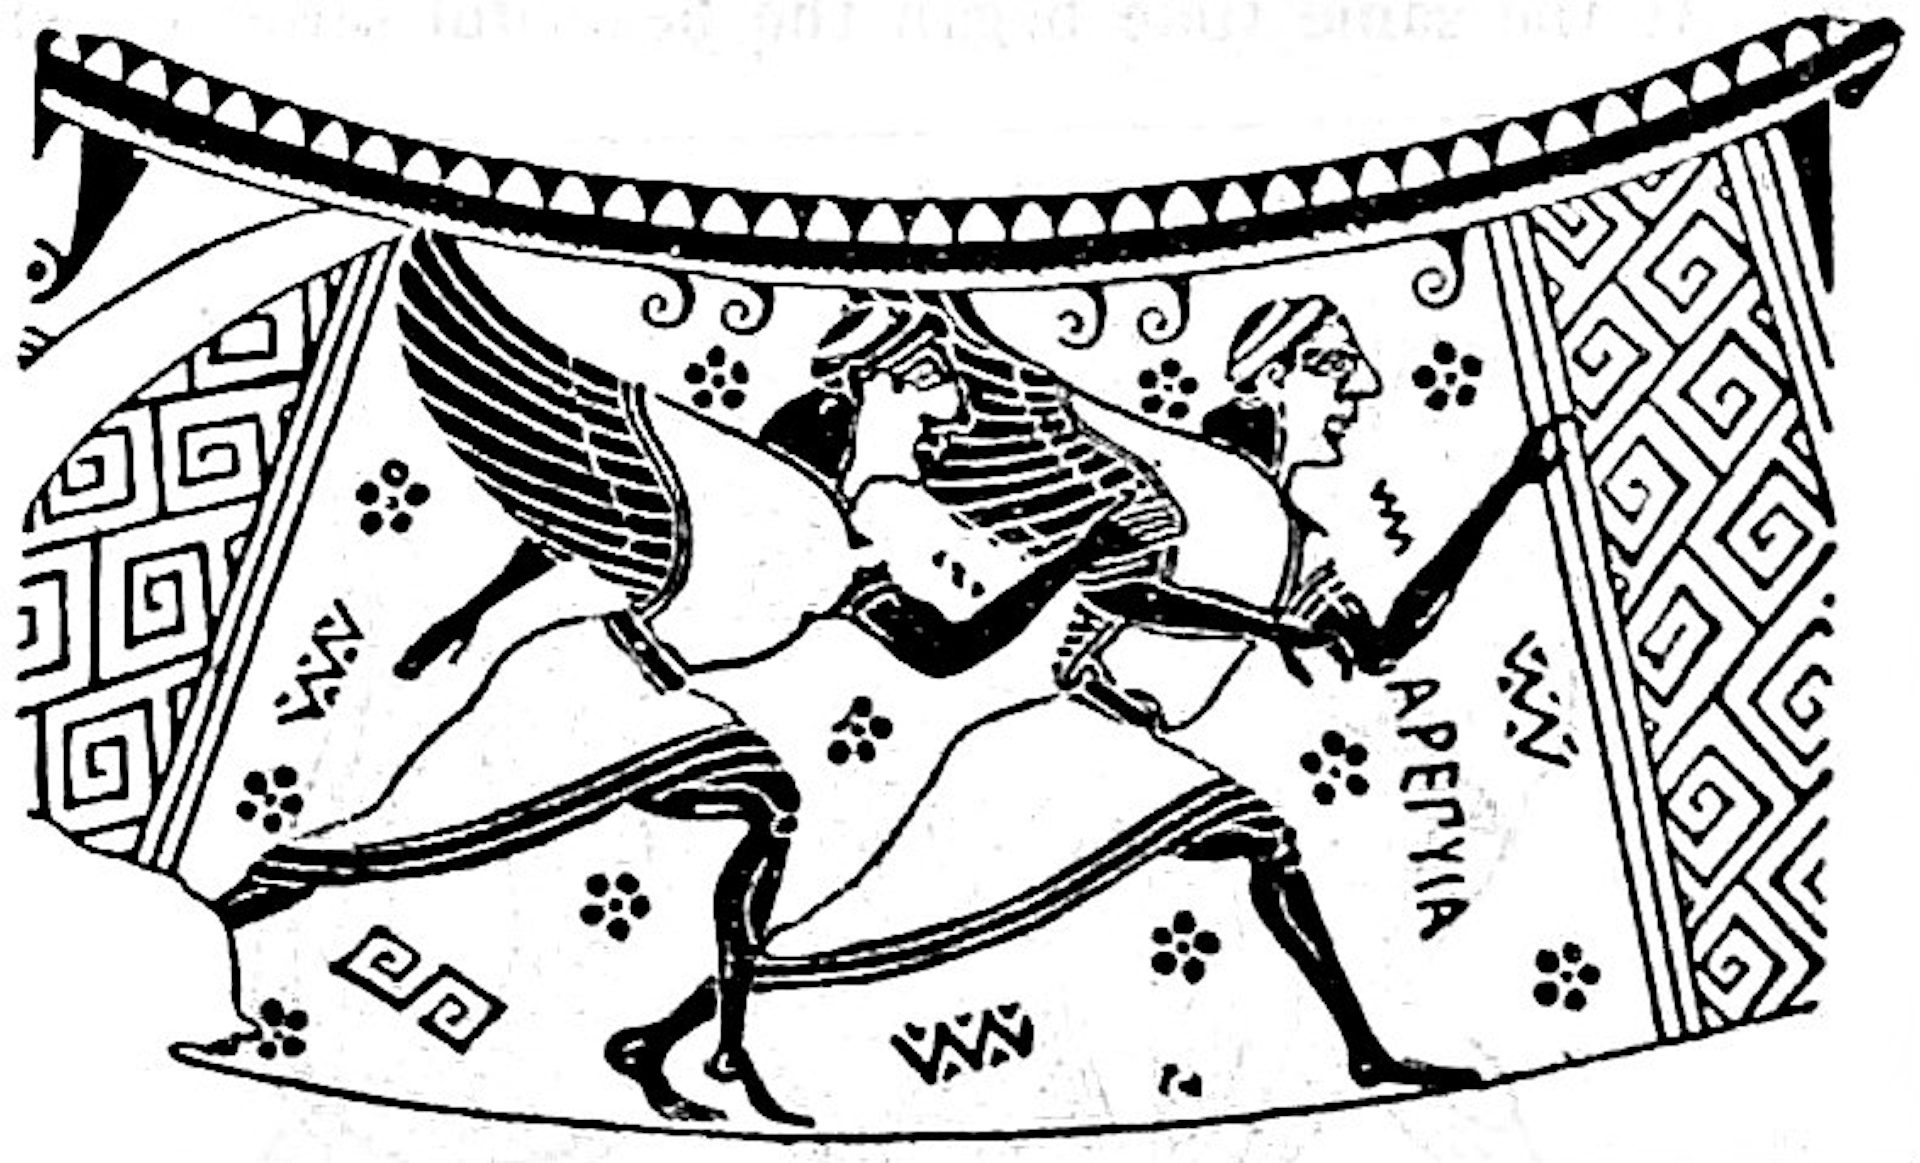 Winged harpies drawing after black-figure louterion circa 620 BCE from Encyclopedia Bittanica, 1911